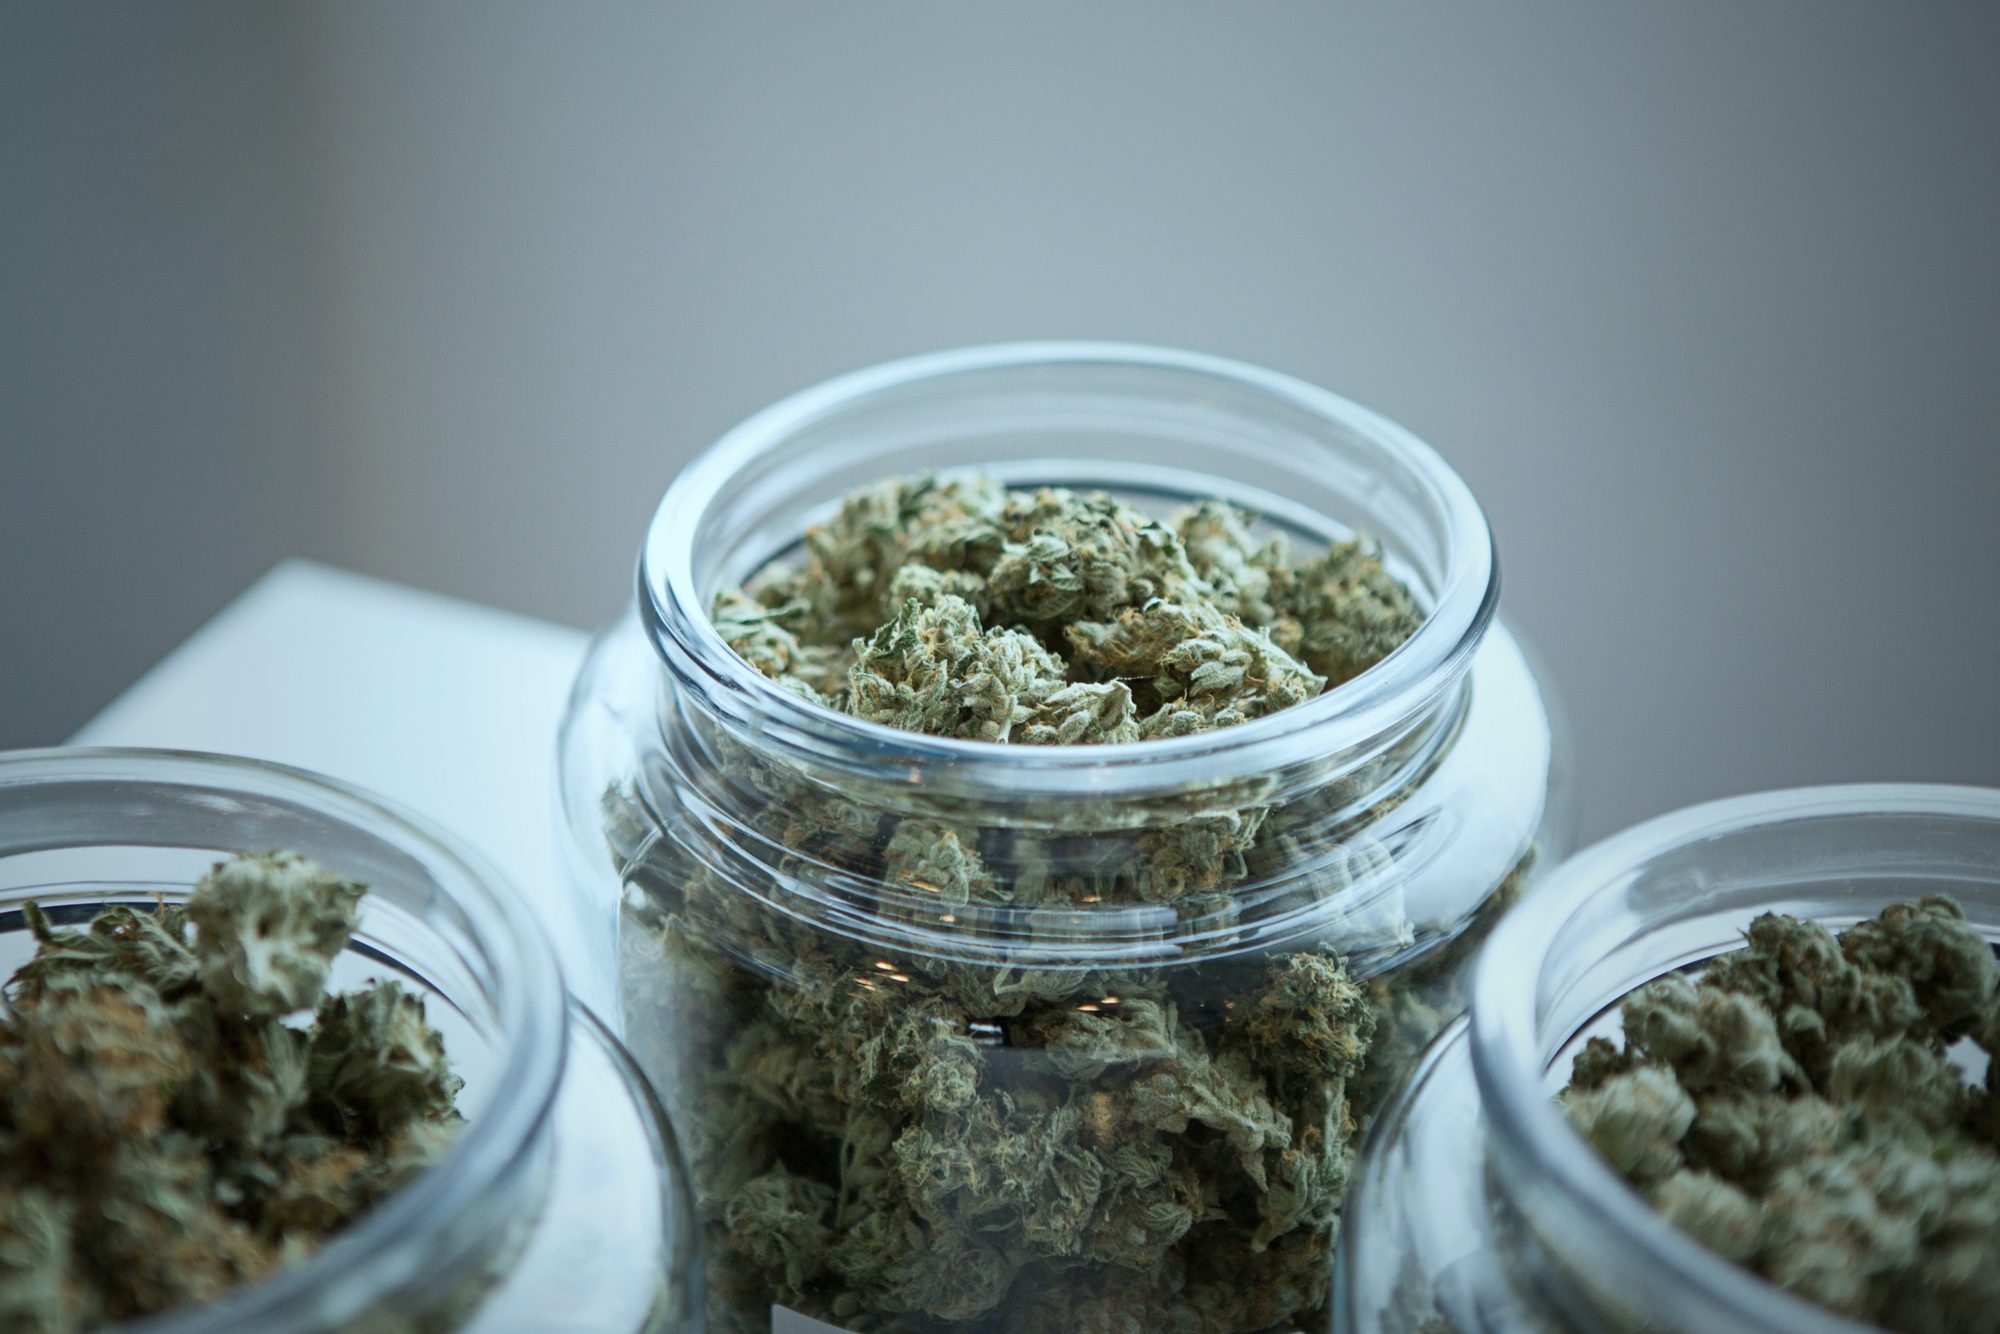 jars of cannabis - Cannabis Business Consultants